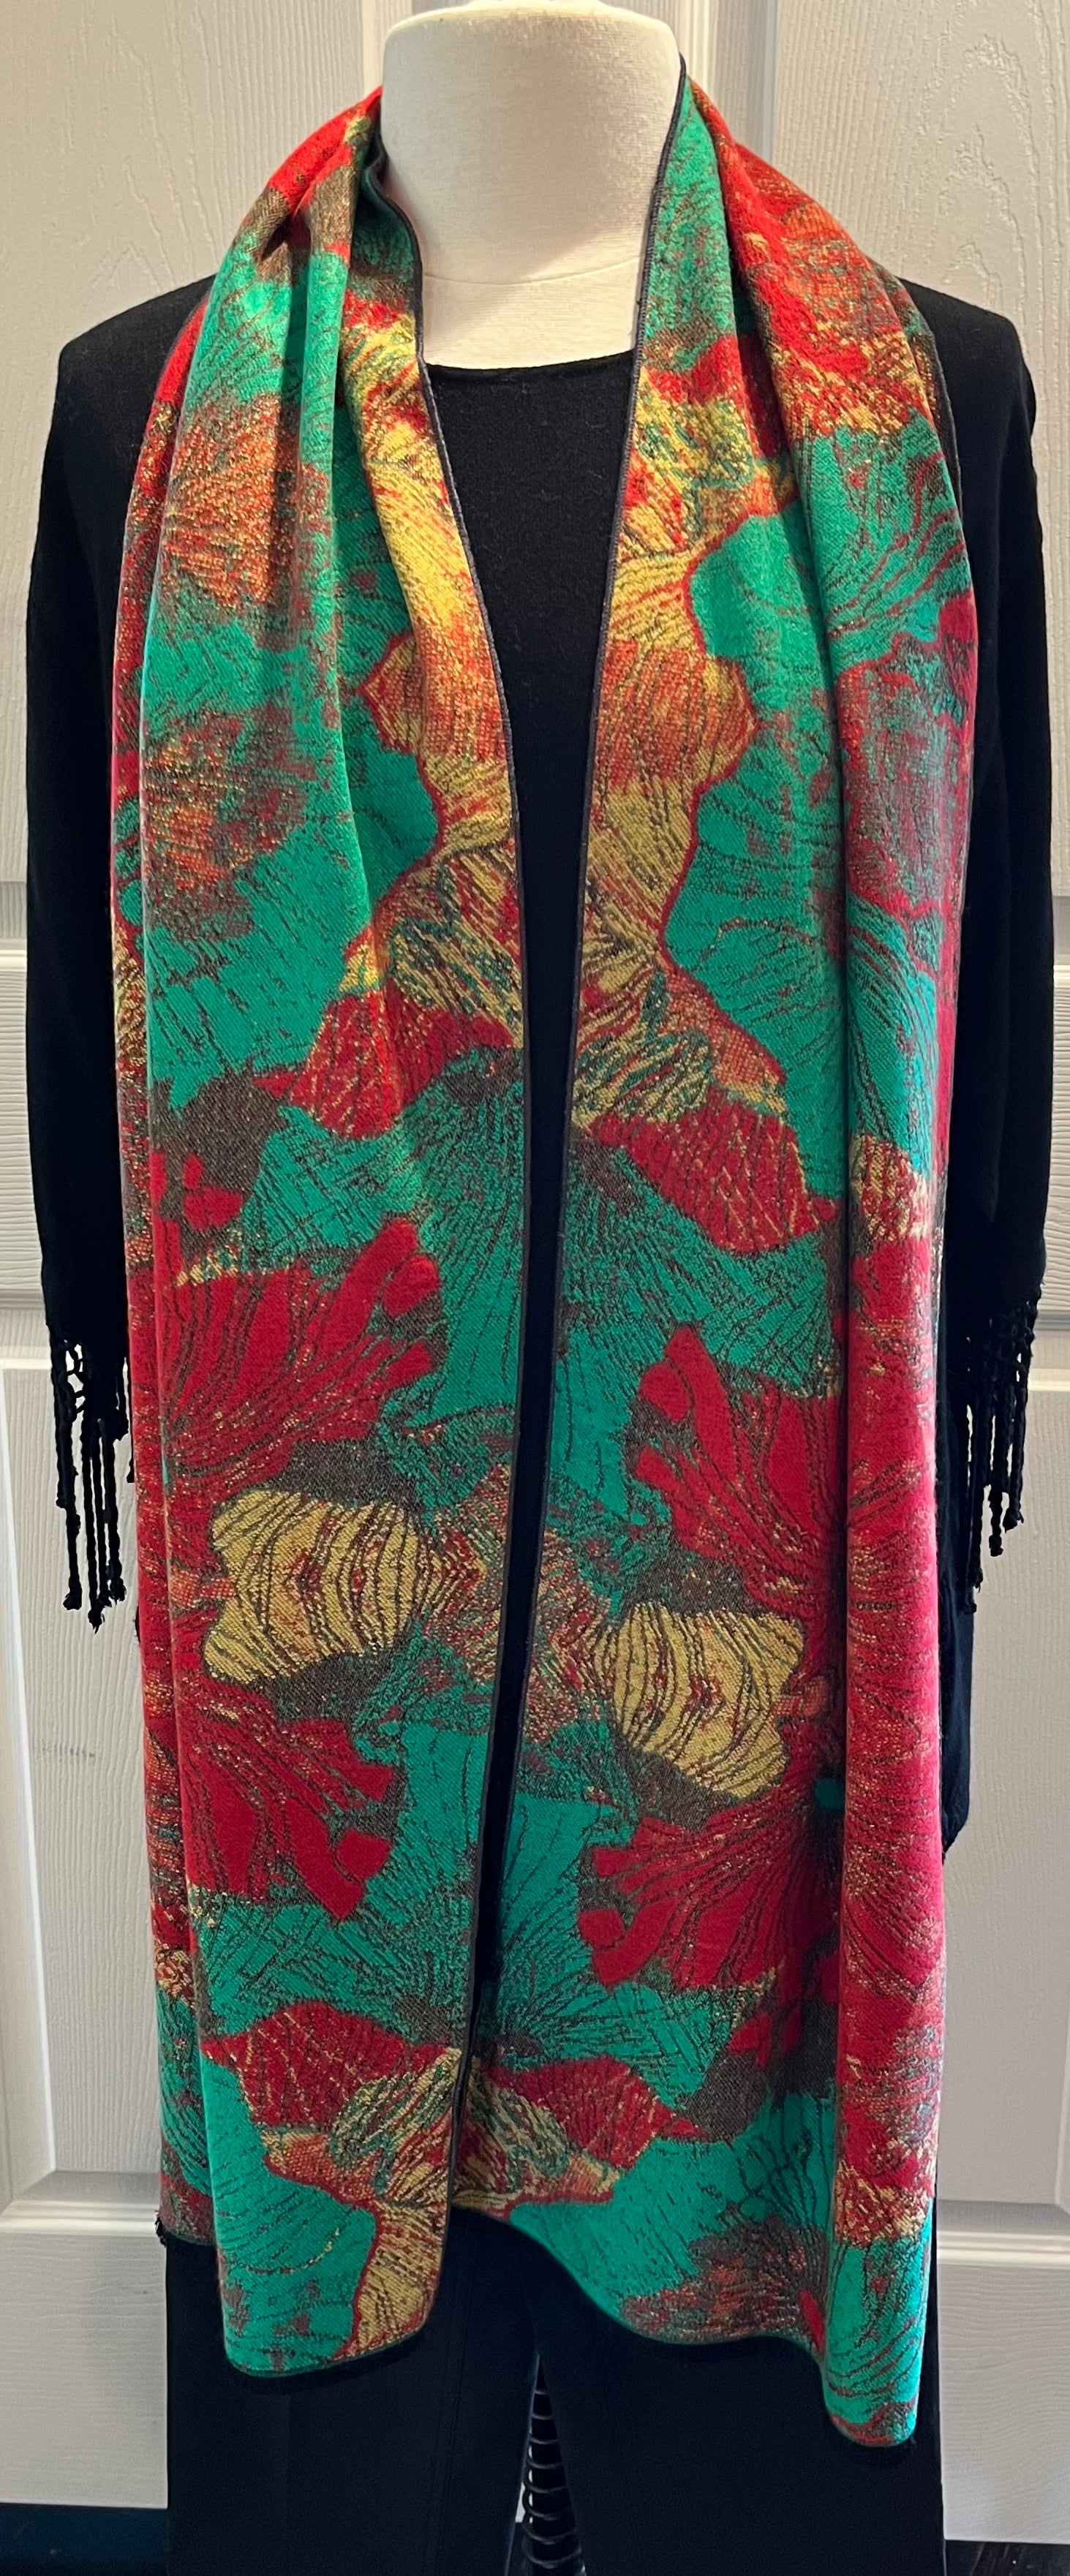 Red & Green Reversible Cashmere Scarf